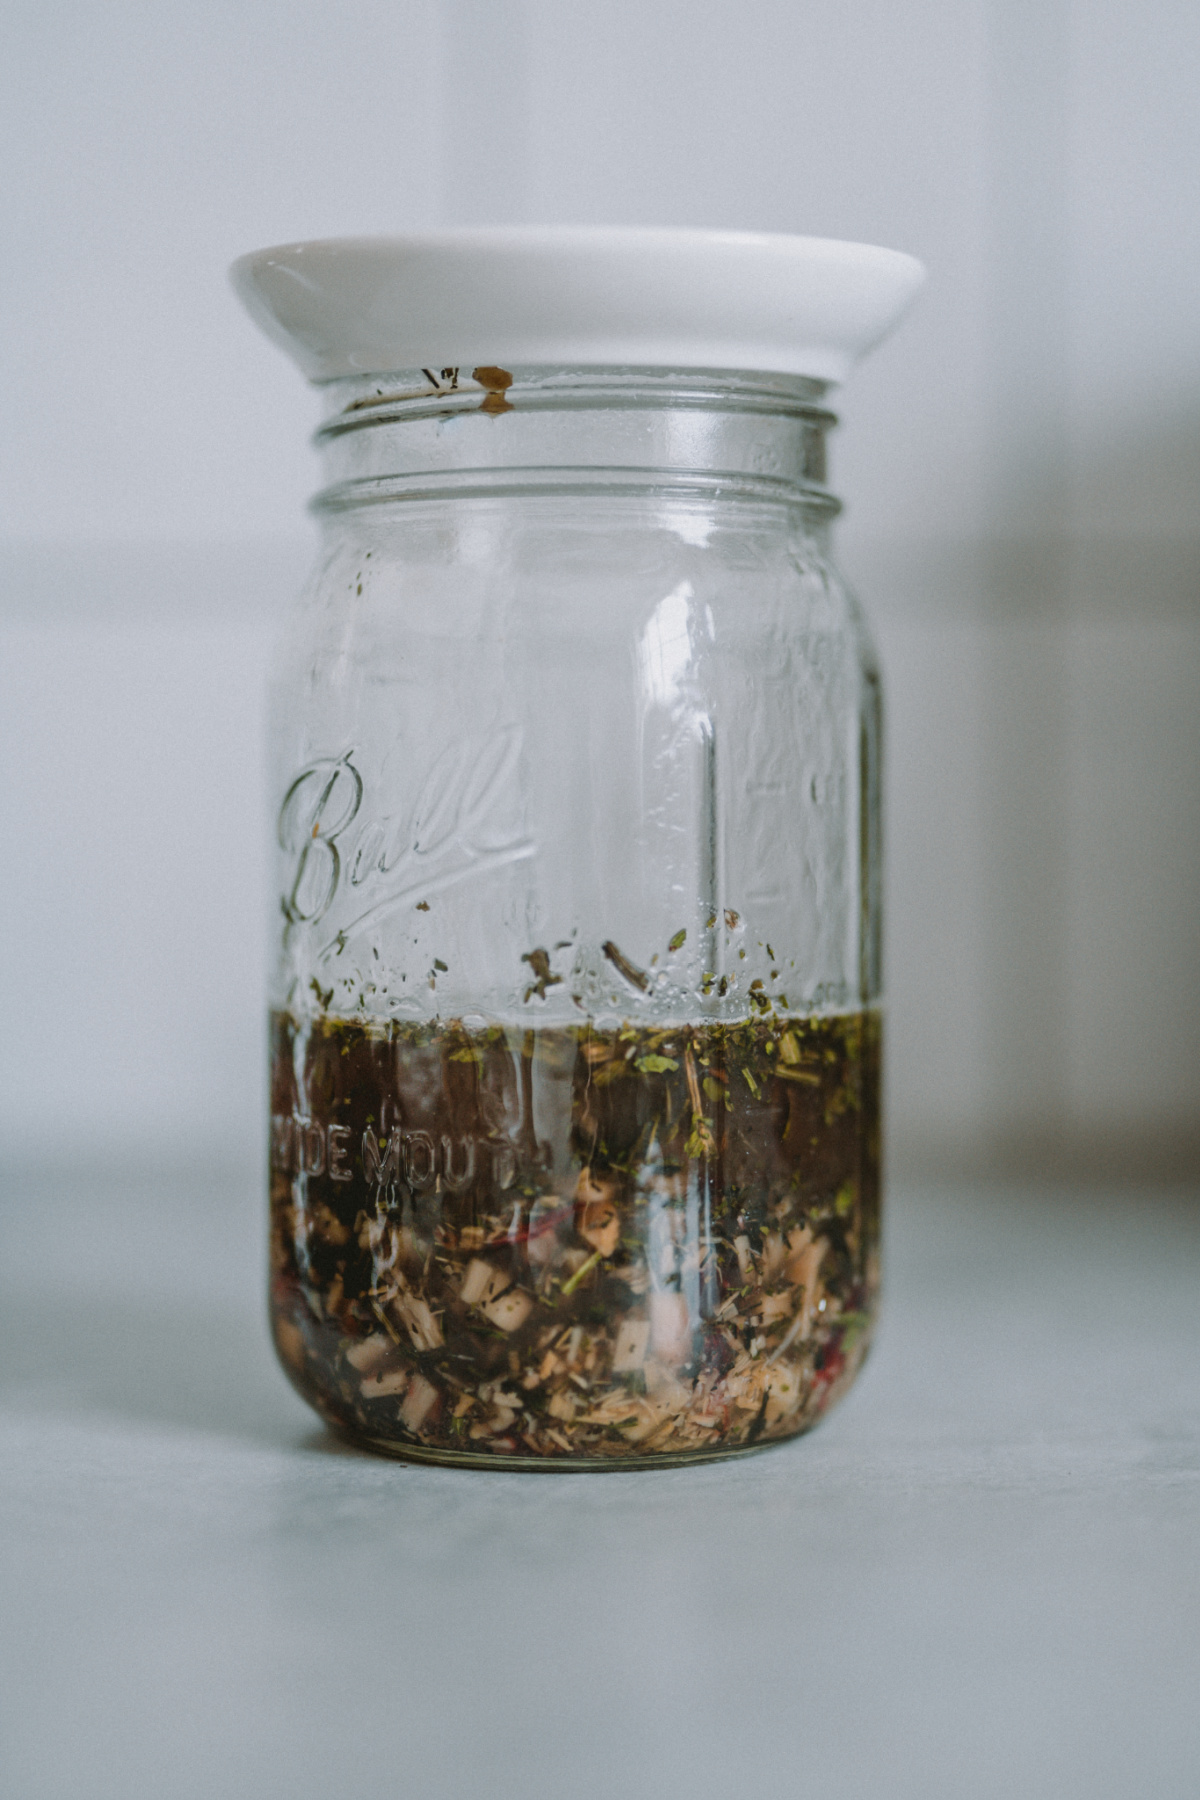 infusing herbs in a jar for cough syrup recipe